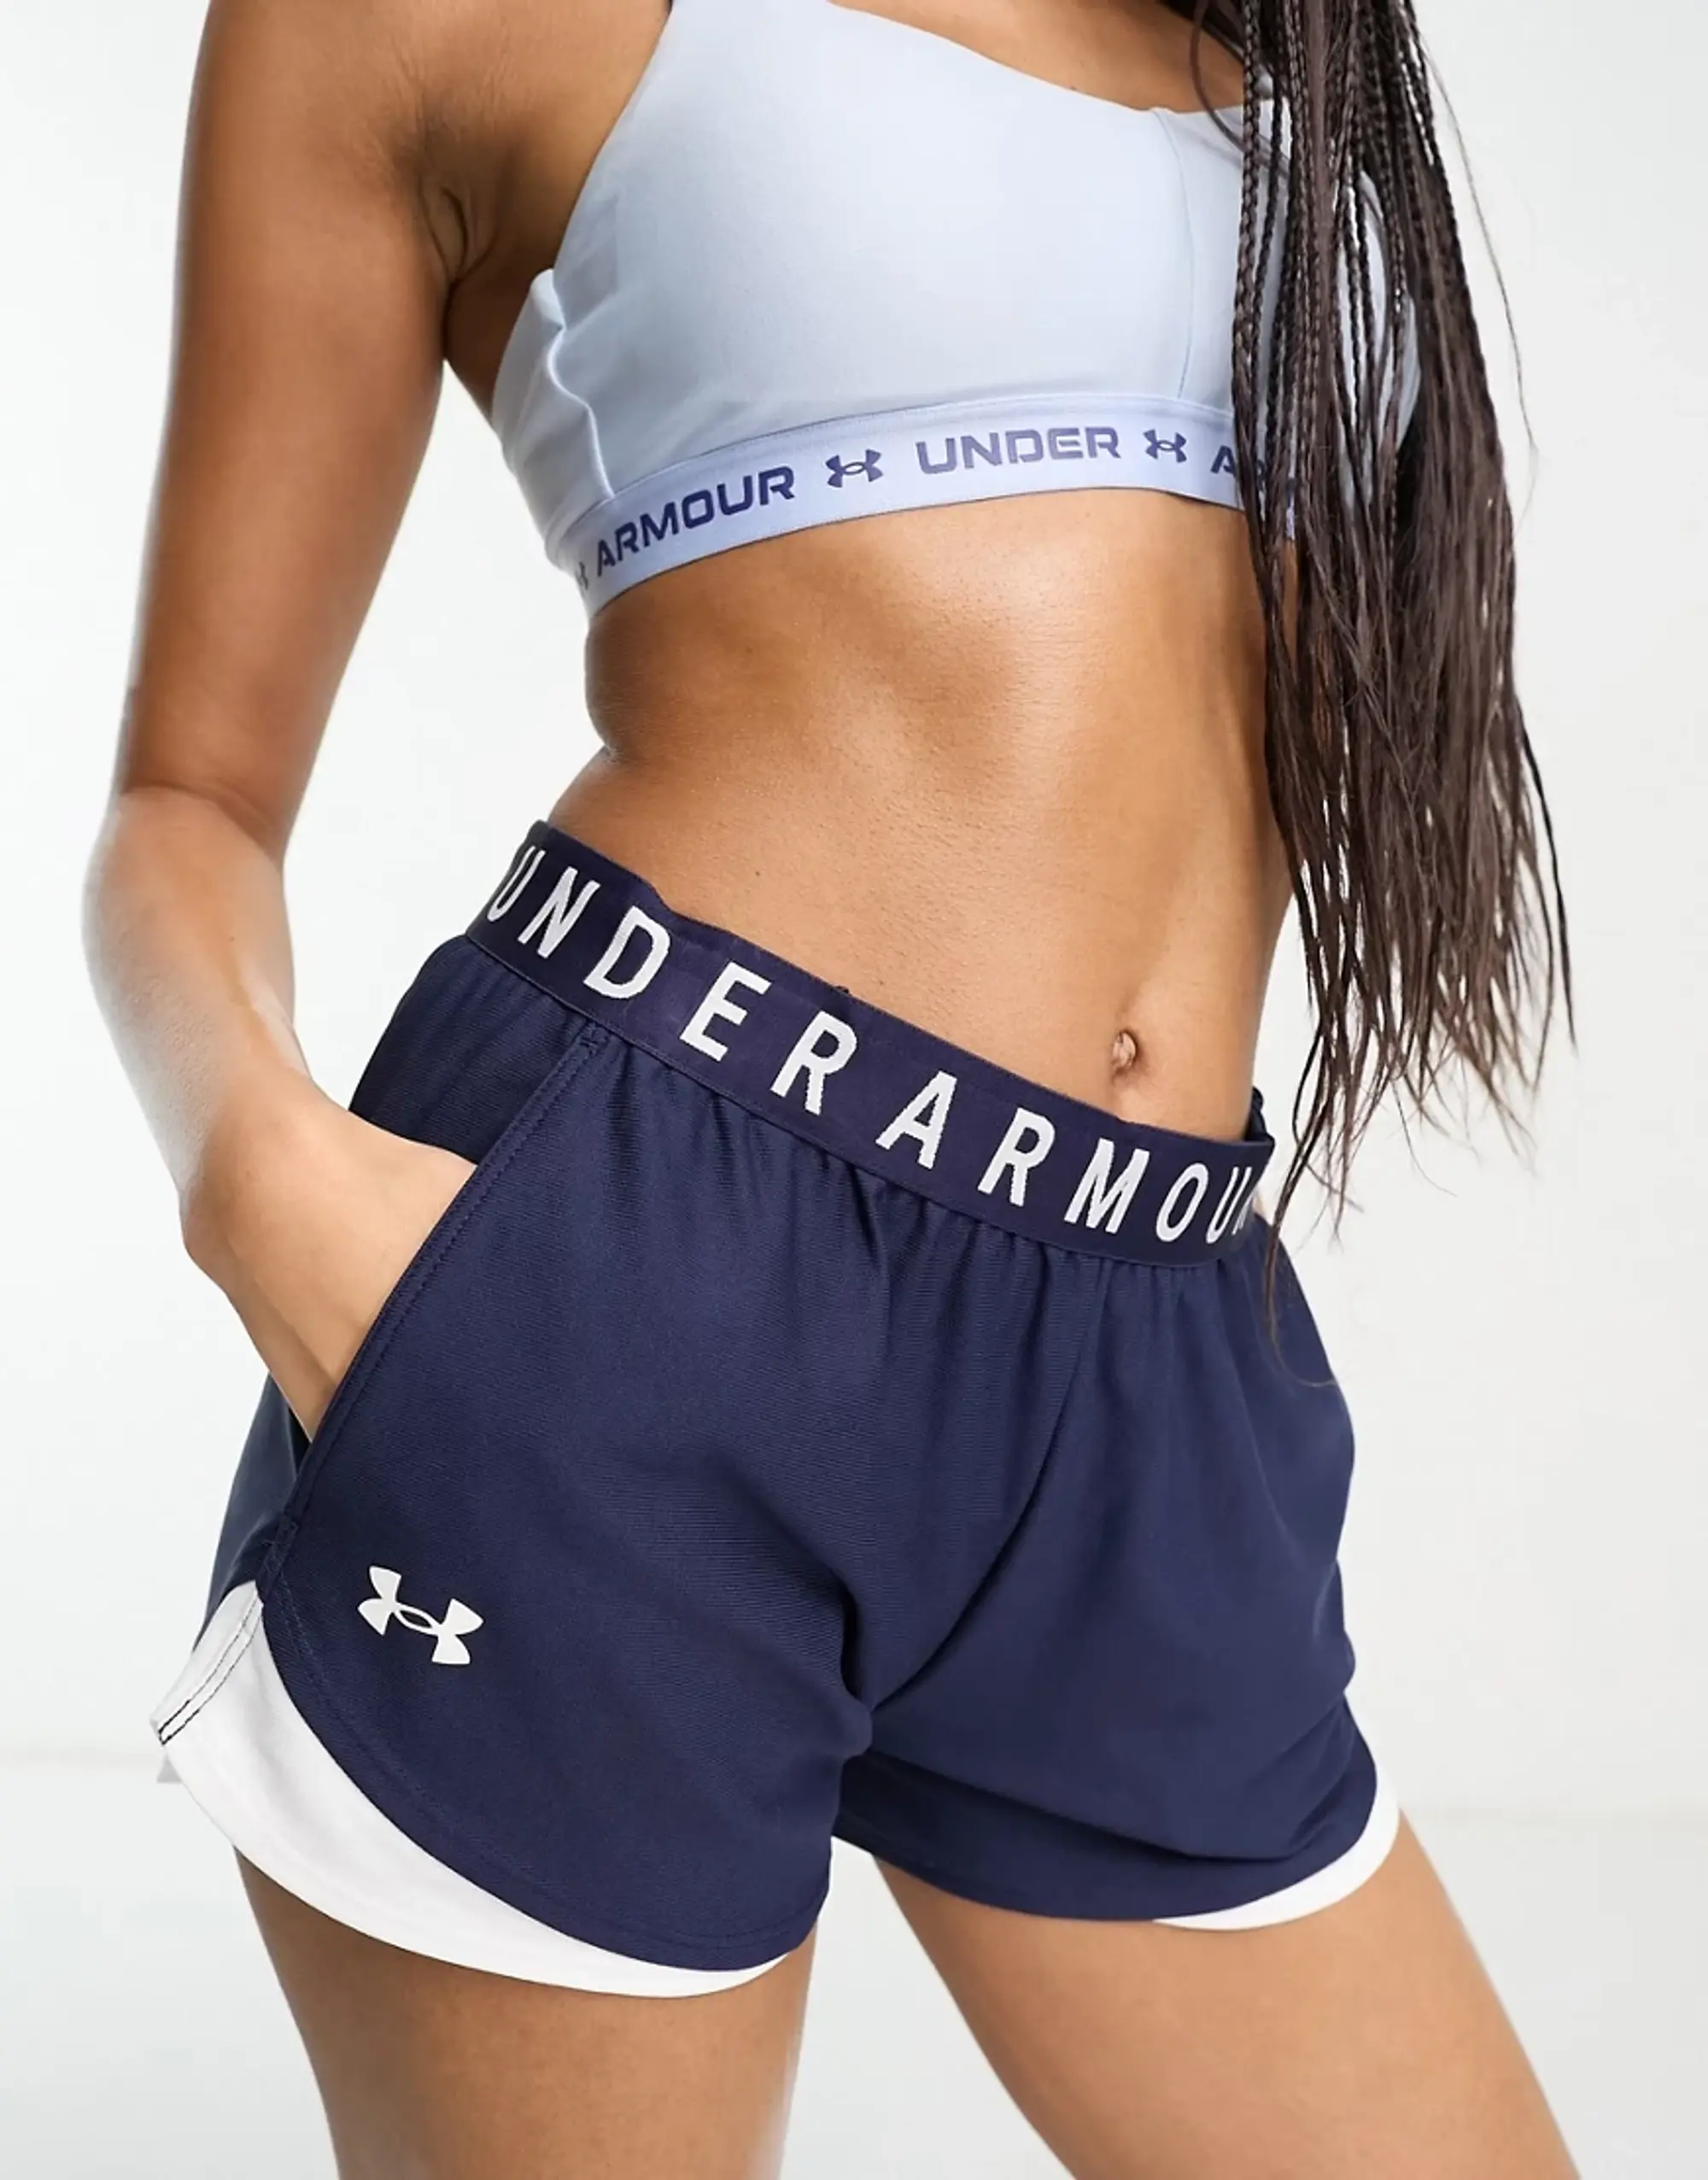 UNDER ARMOUR Play Up Shorts 3.0 - Navy/White, Navy/White